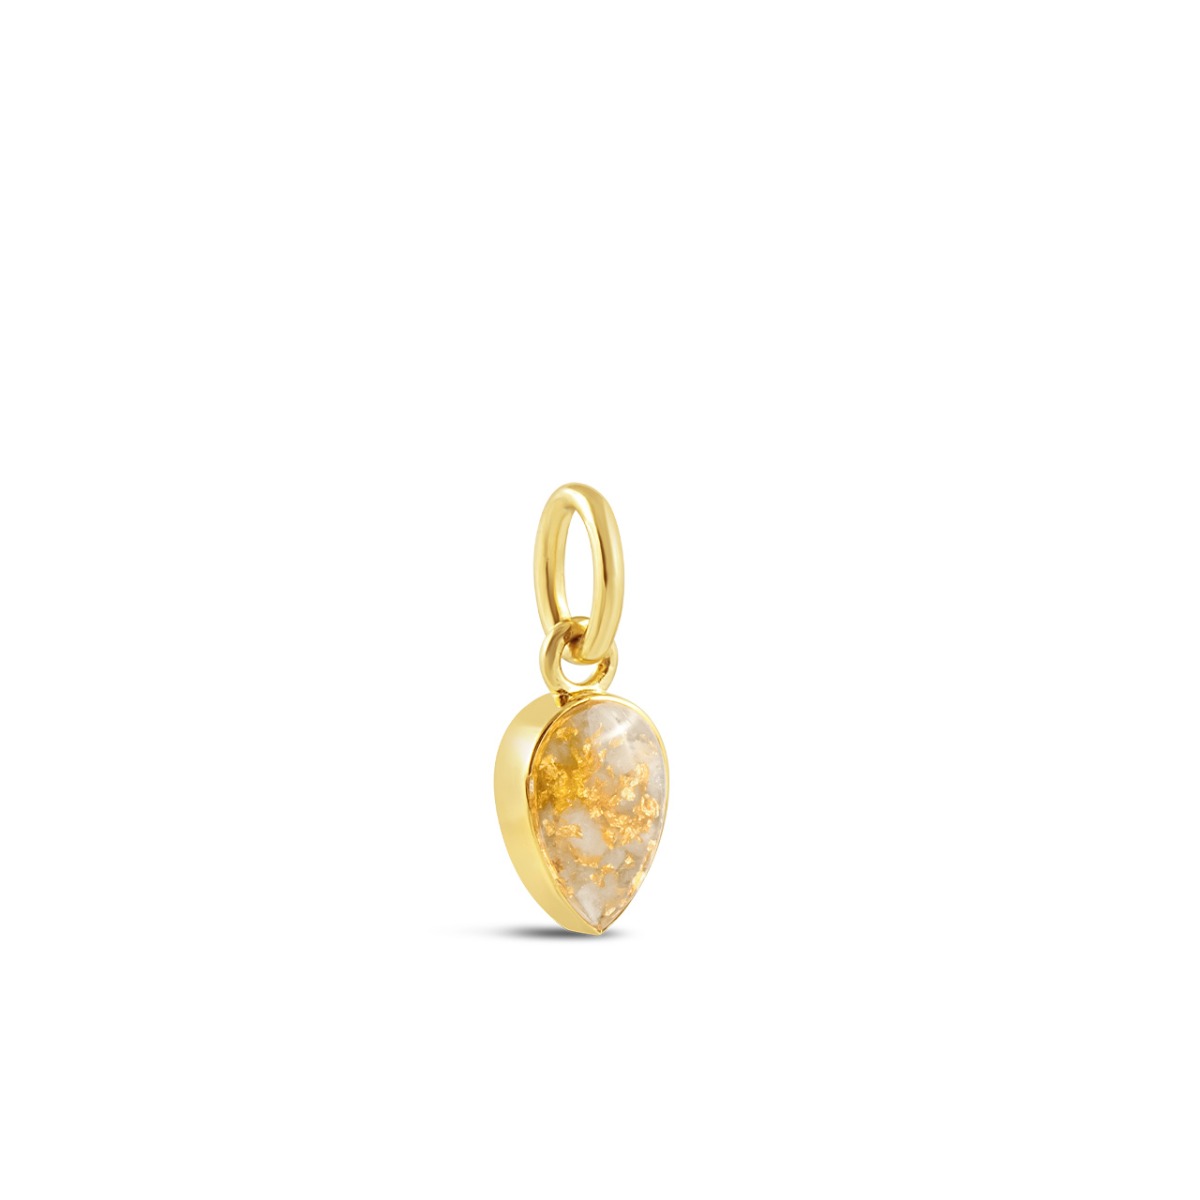 Collectible Travel Treasures™ Customizable Inverted Teardrop Charm - 14k Gold Vermeil